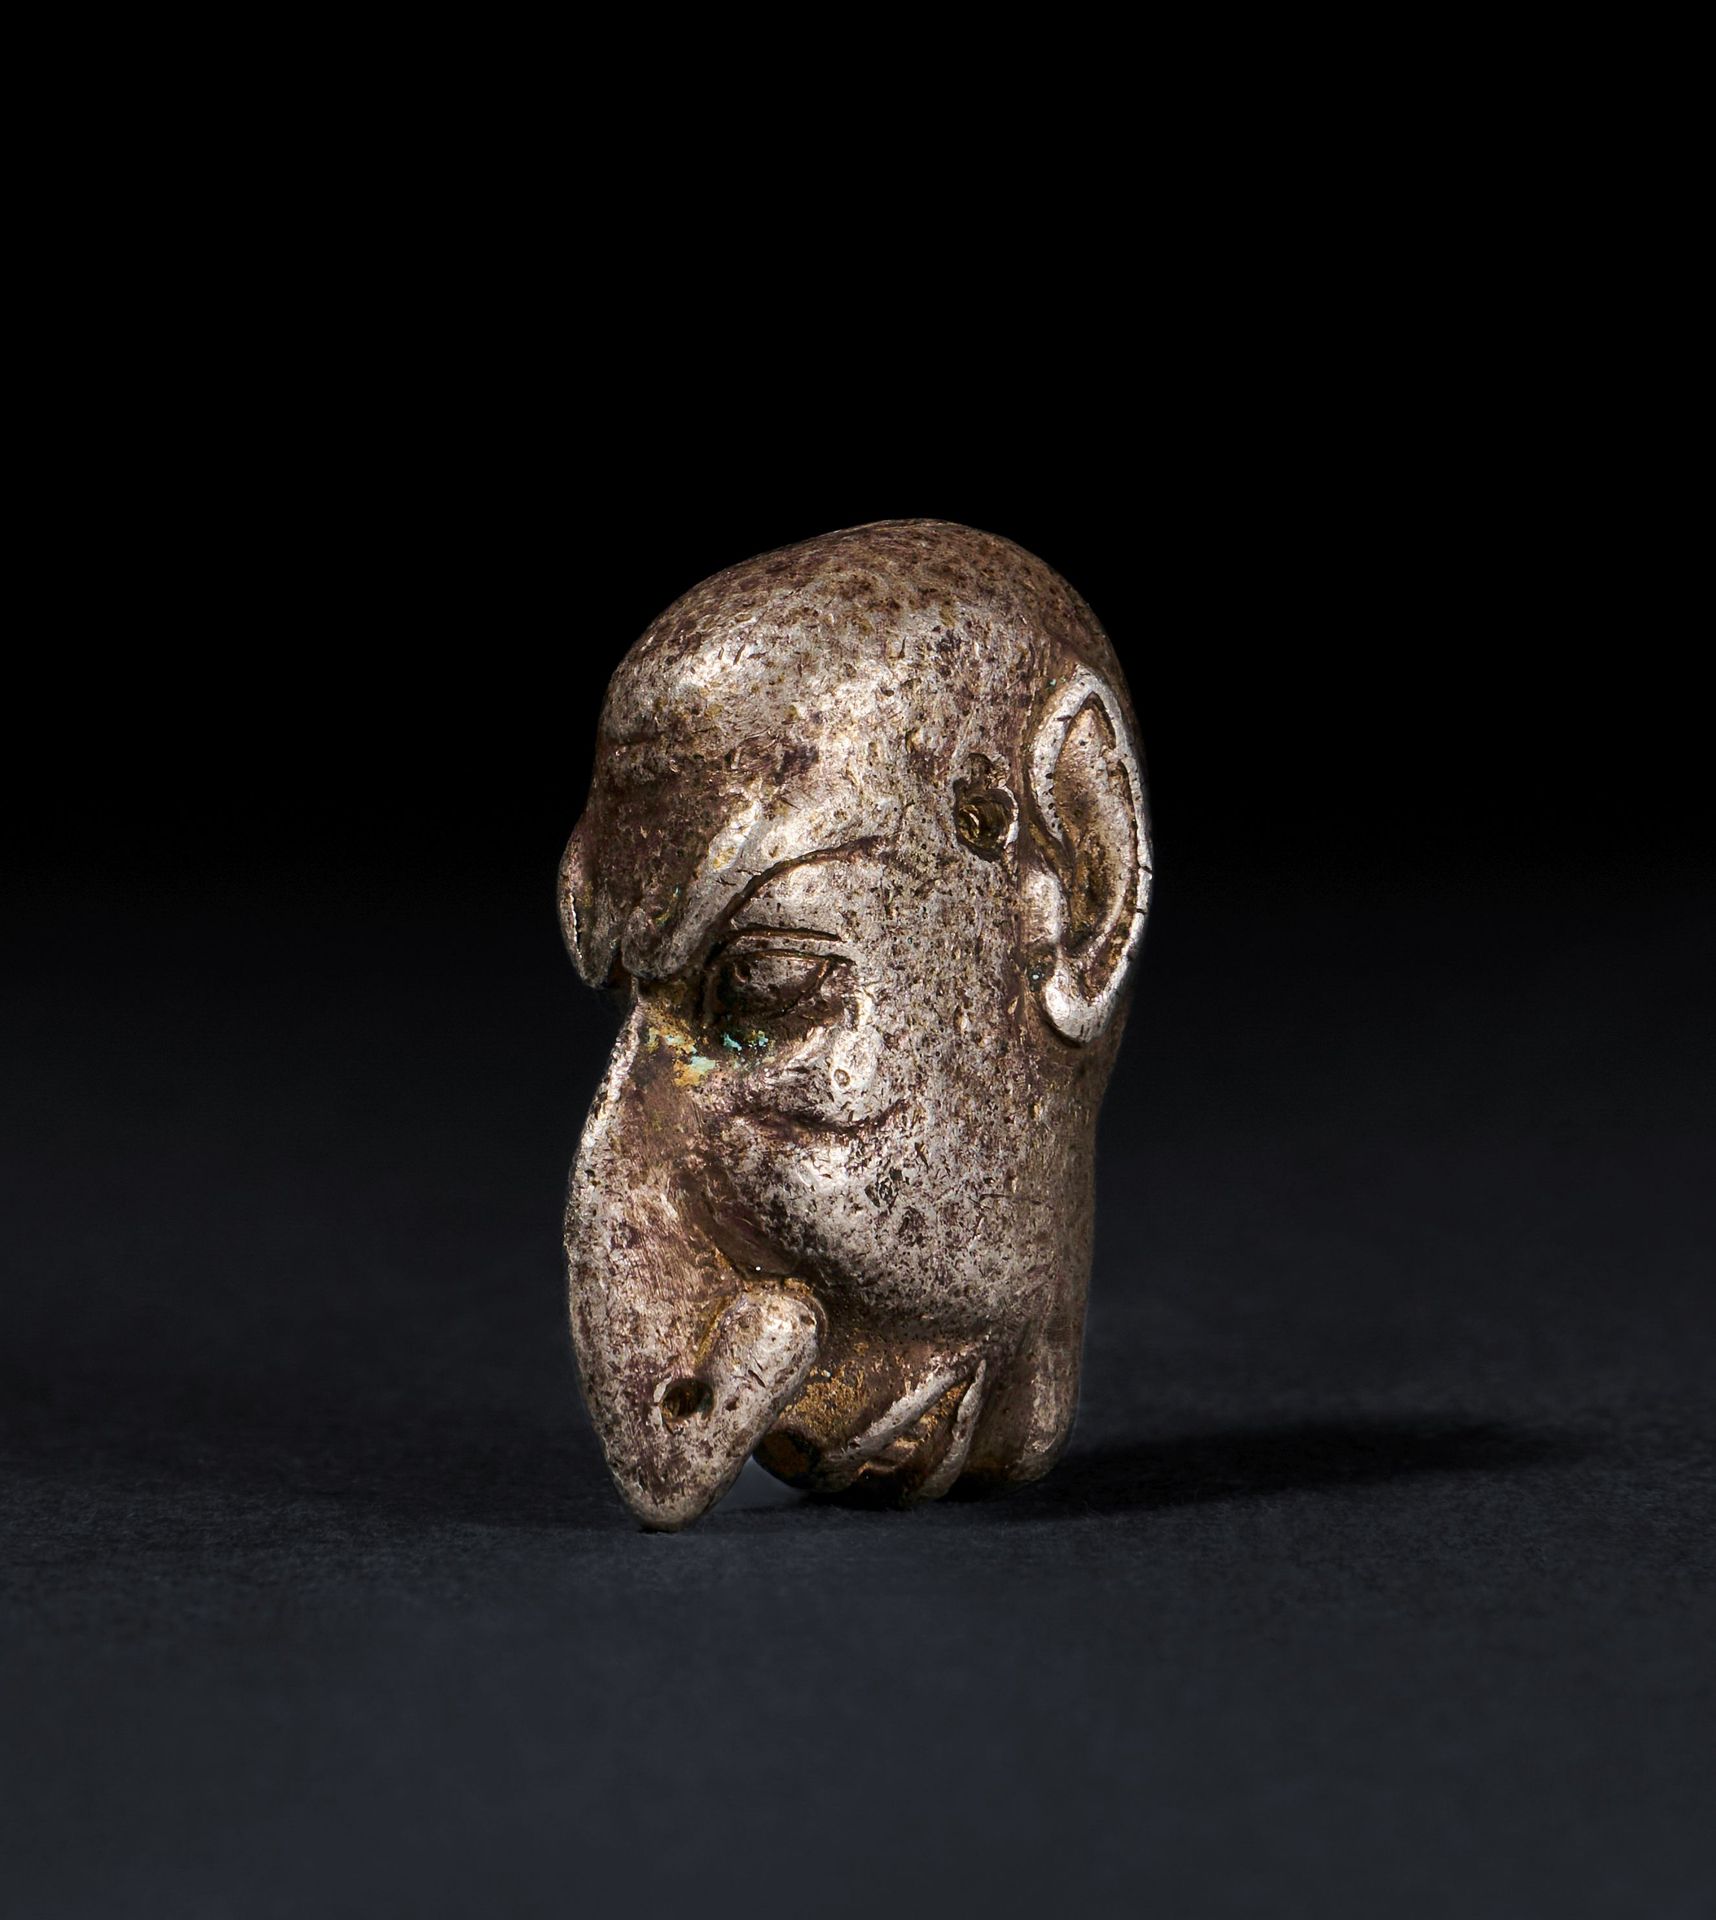 A ROMAN SOLID SILVER AMULET OF A "GROTESK" FACE, CIRCA 1ST-2ND CENTURY A.D. AMUL&hellip;